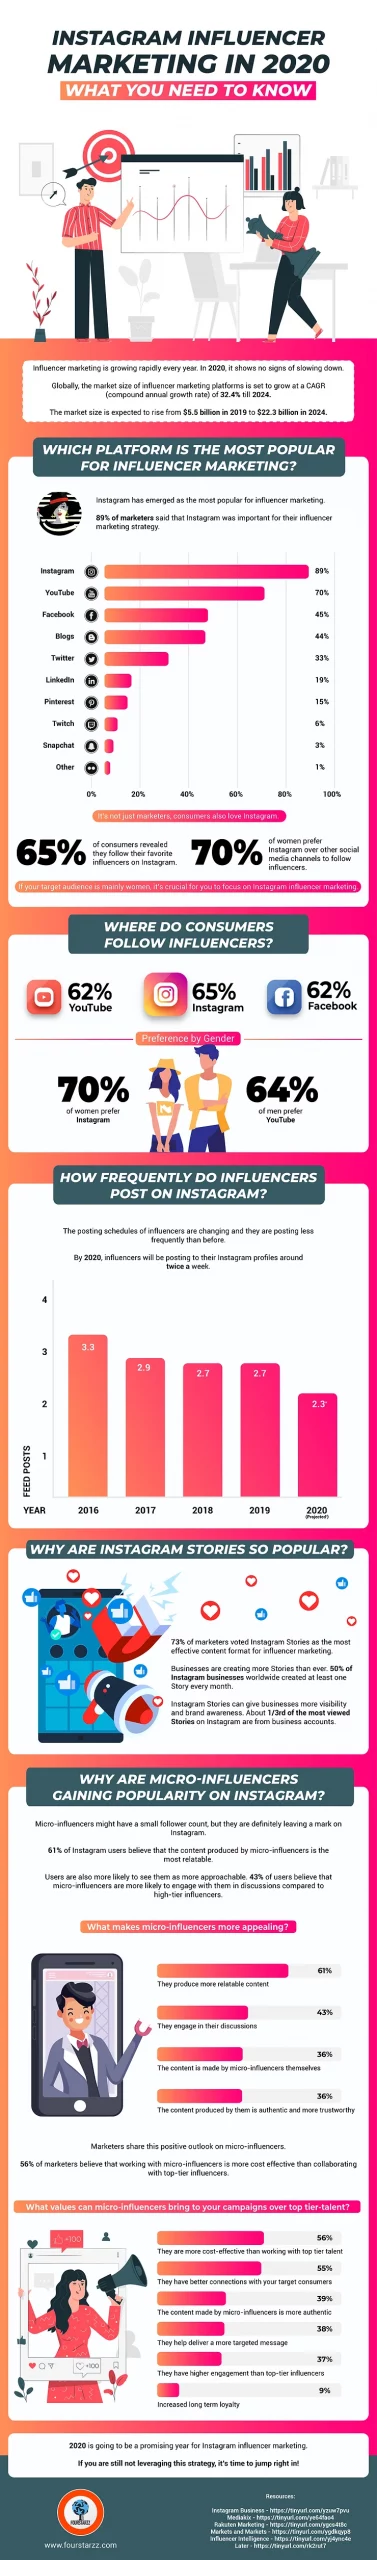 Instagram Influencer Marketing In 2020: What You Need to Know